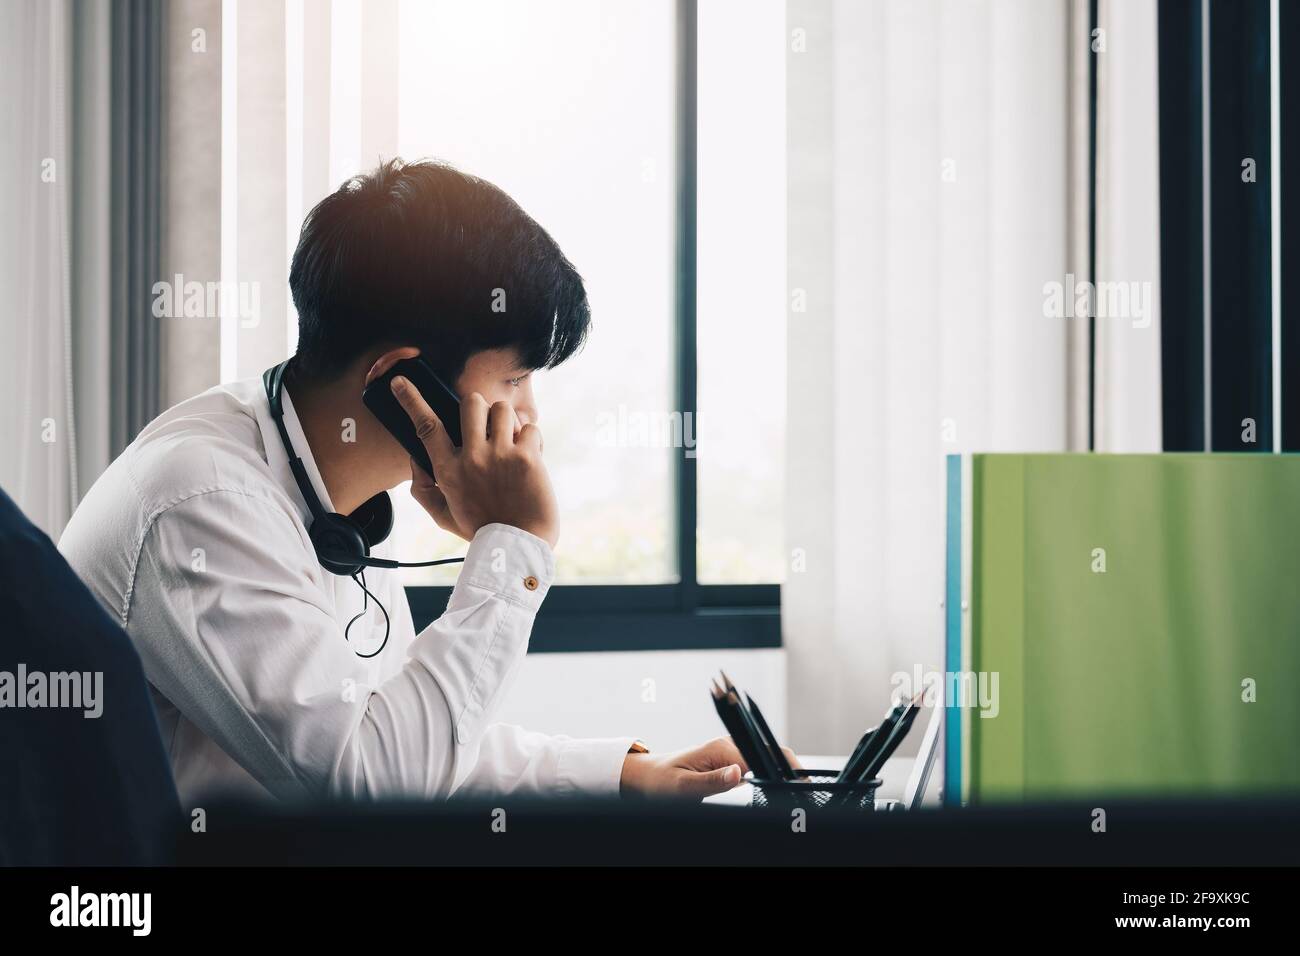 Side view of young man entrepreneur in office making phone call while working with laptop. Stock Photo